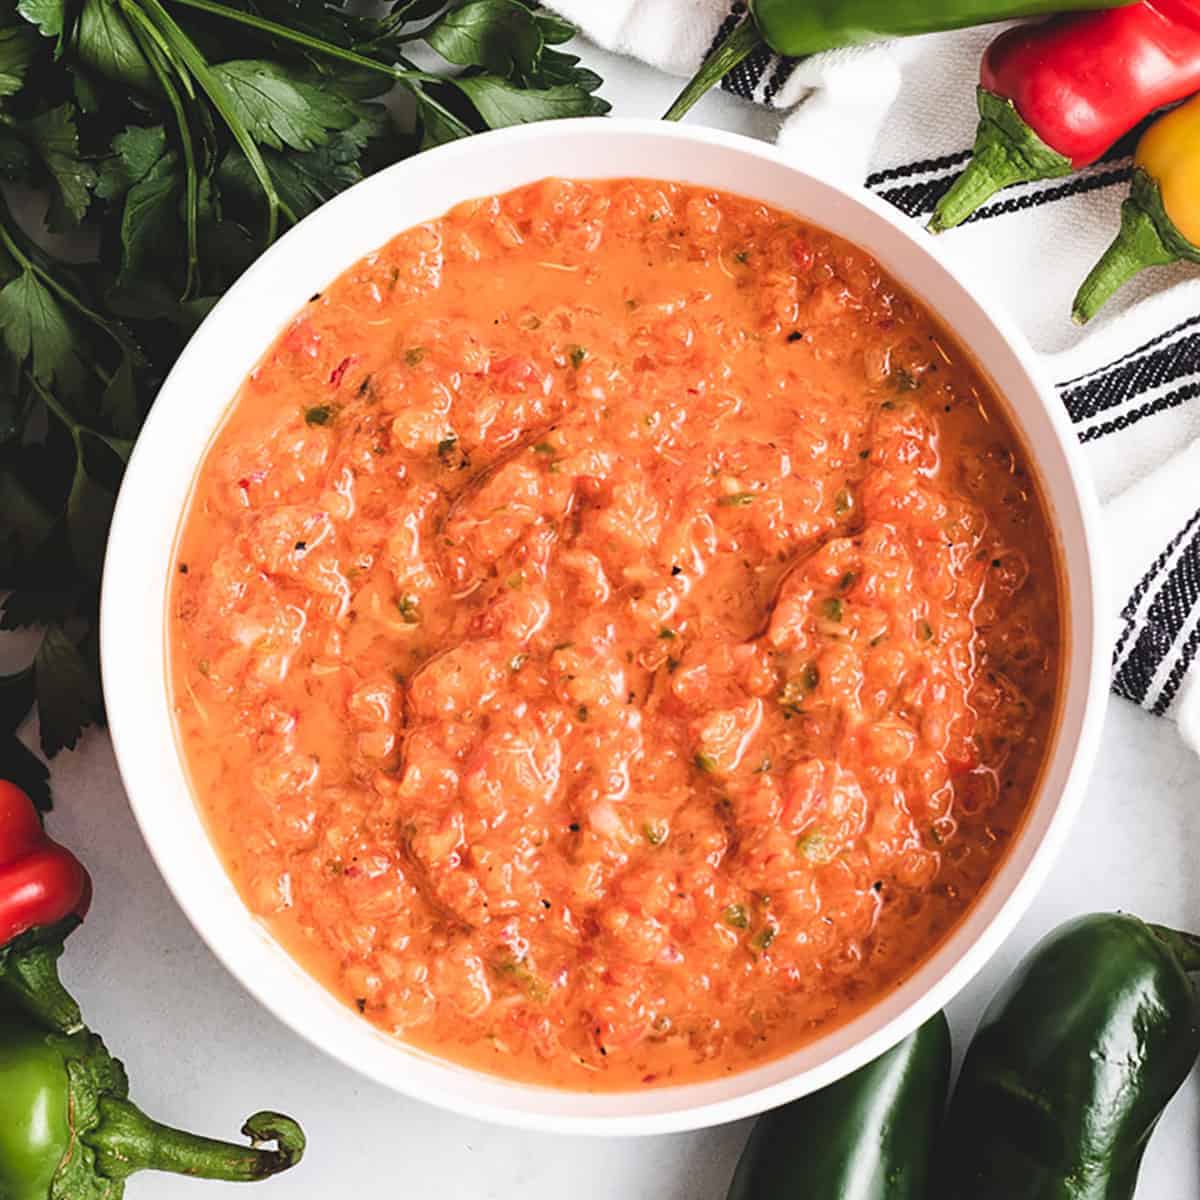 An aerial view of the roasted red pepper salsa.